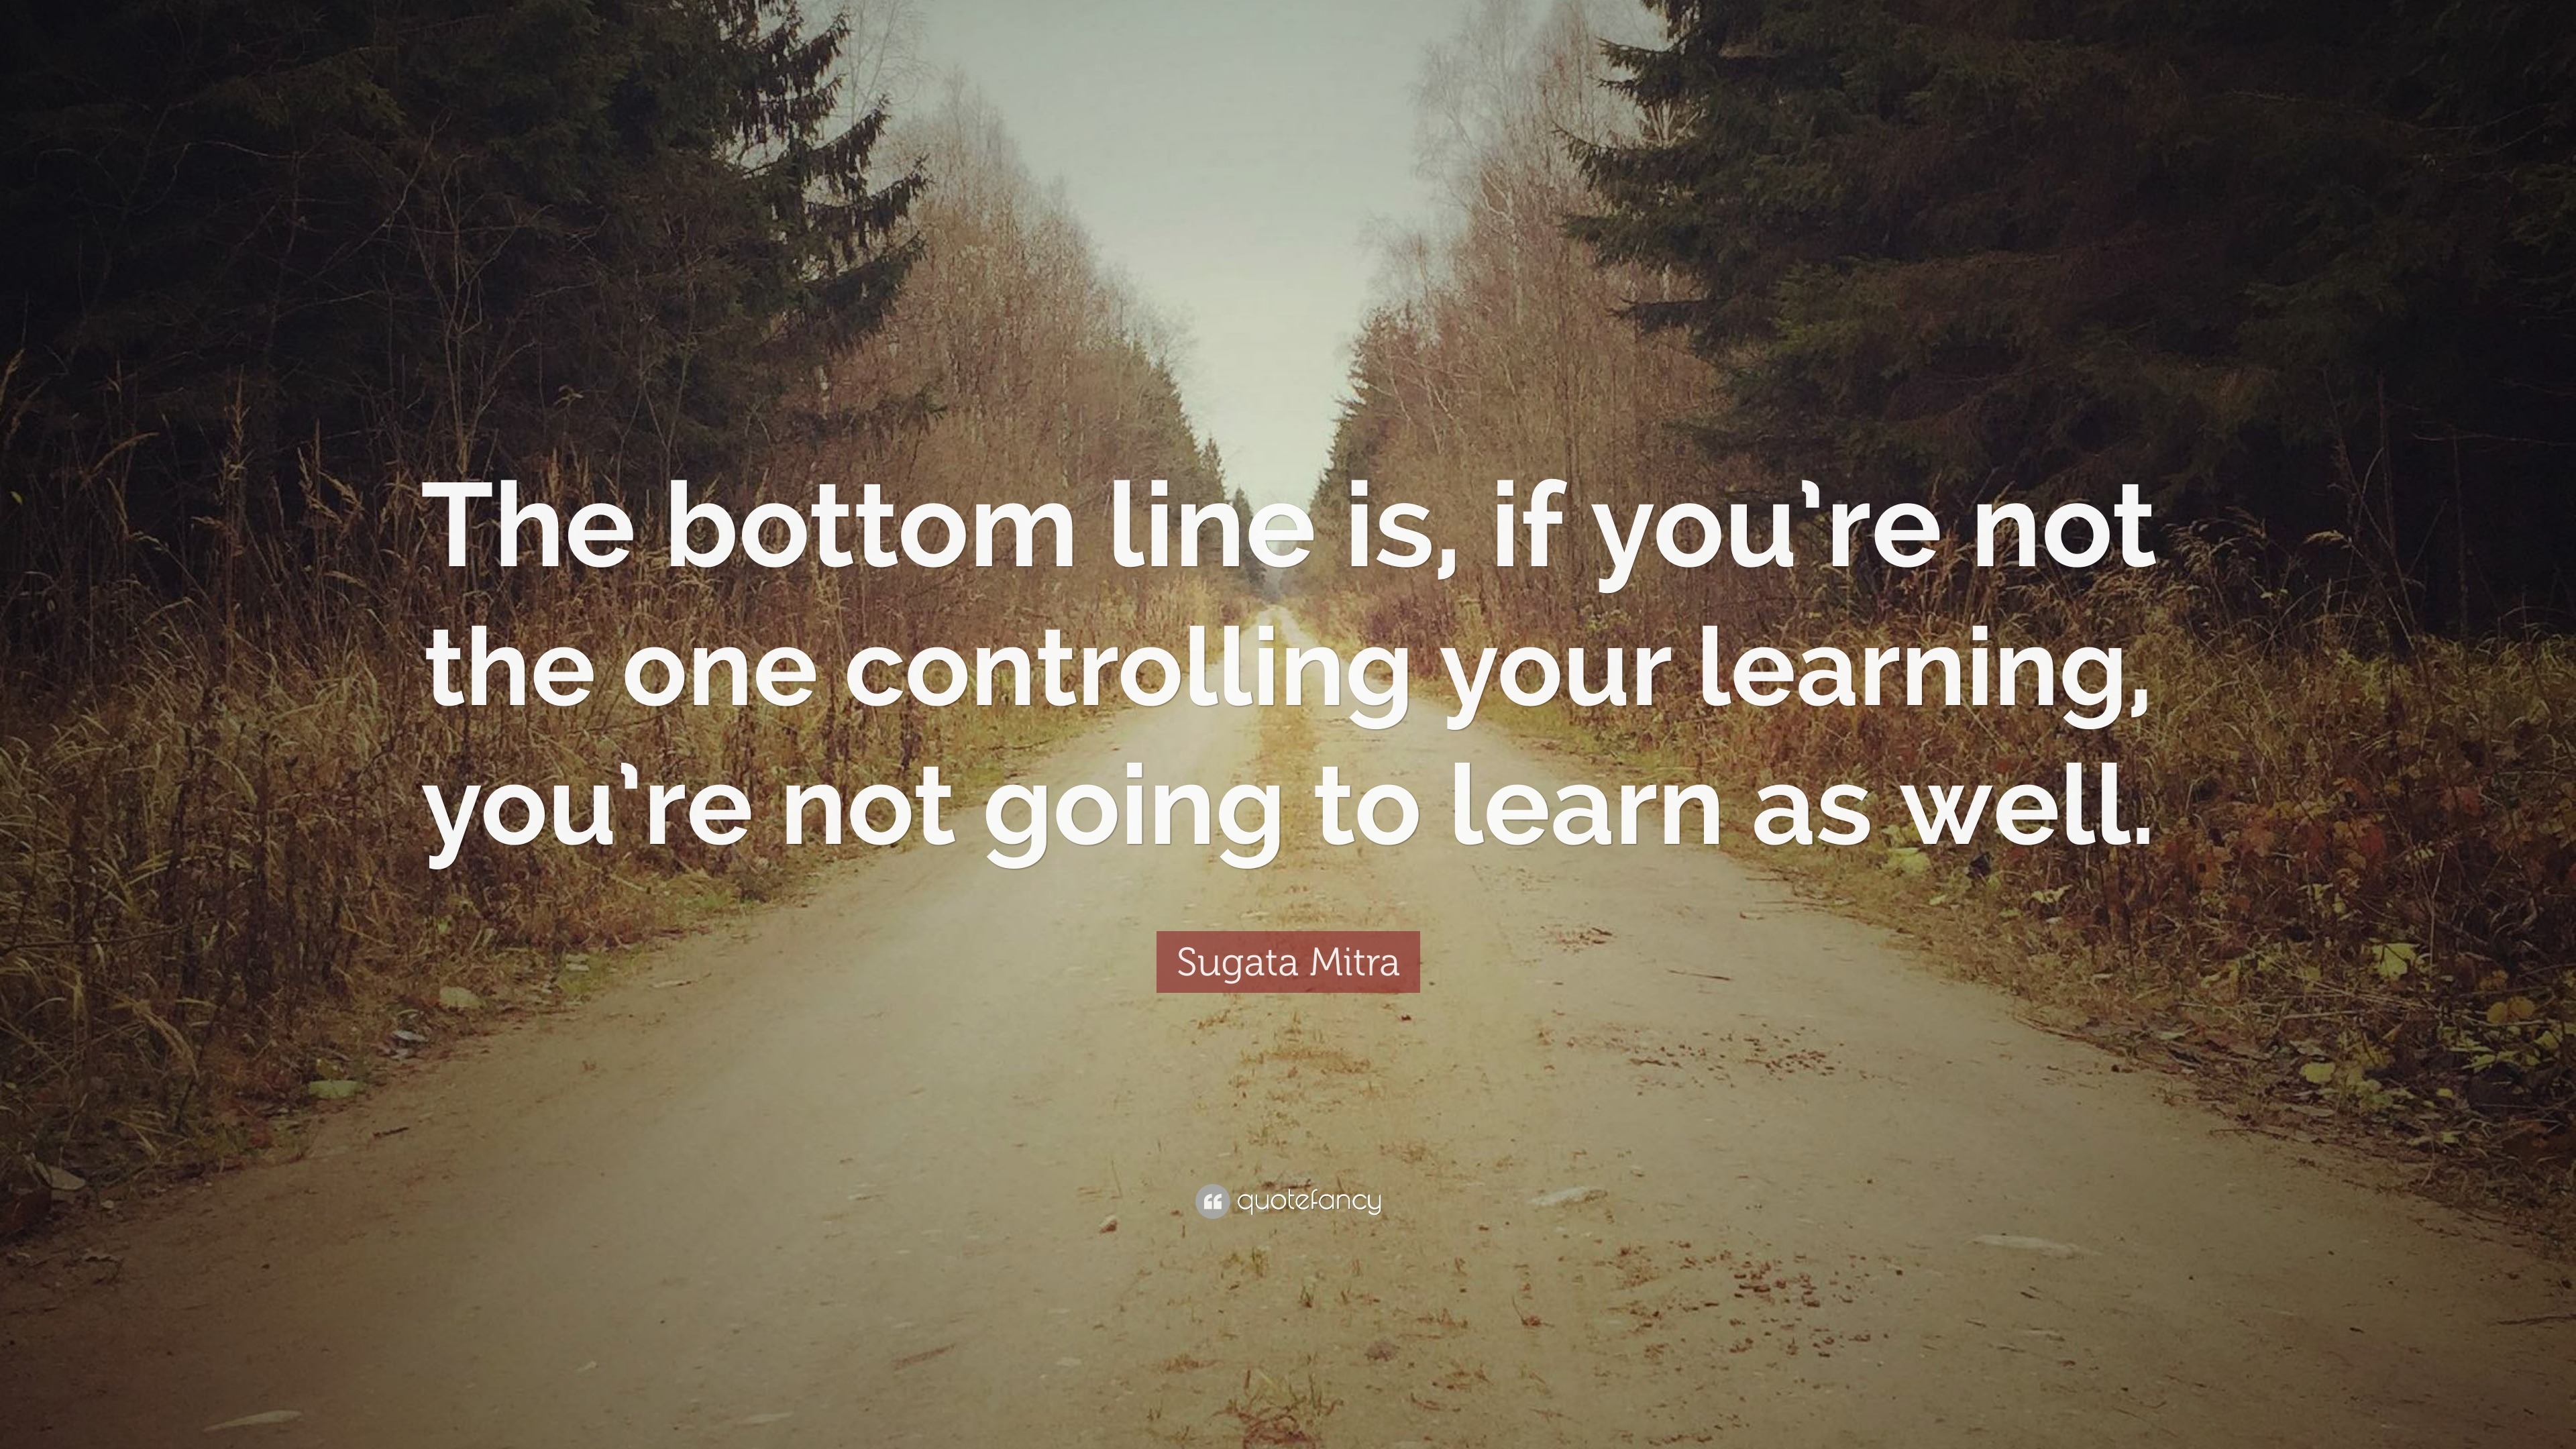 Sugata Mitra Quote: “The bottom line is, if you’re not the one ...